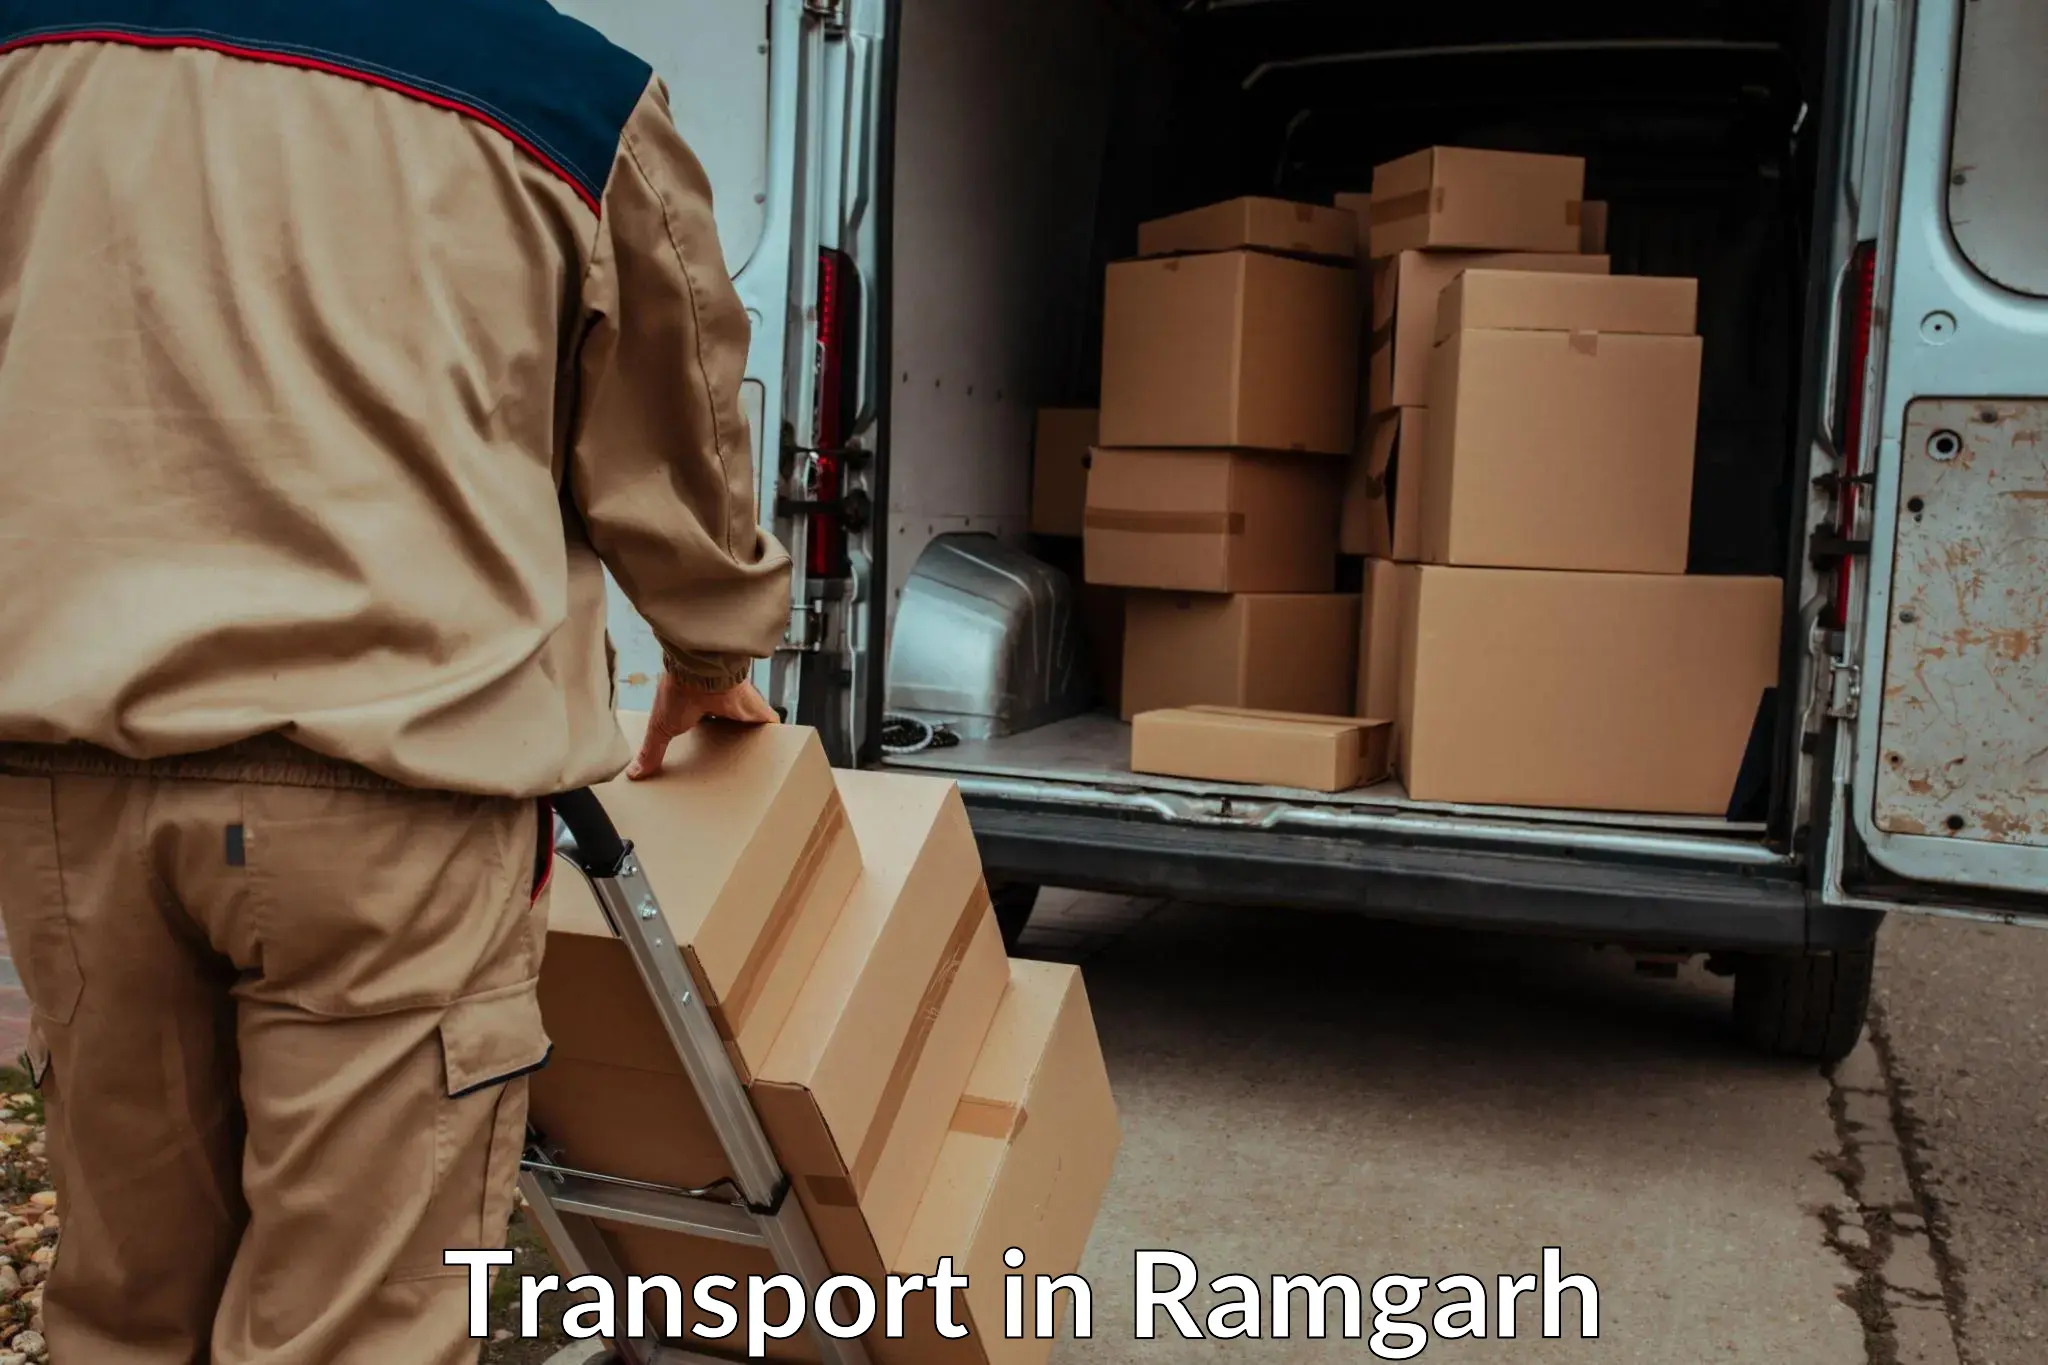 Transport services in Ramgarh